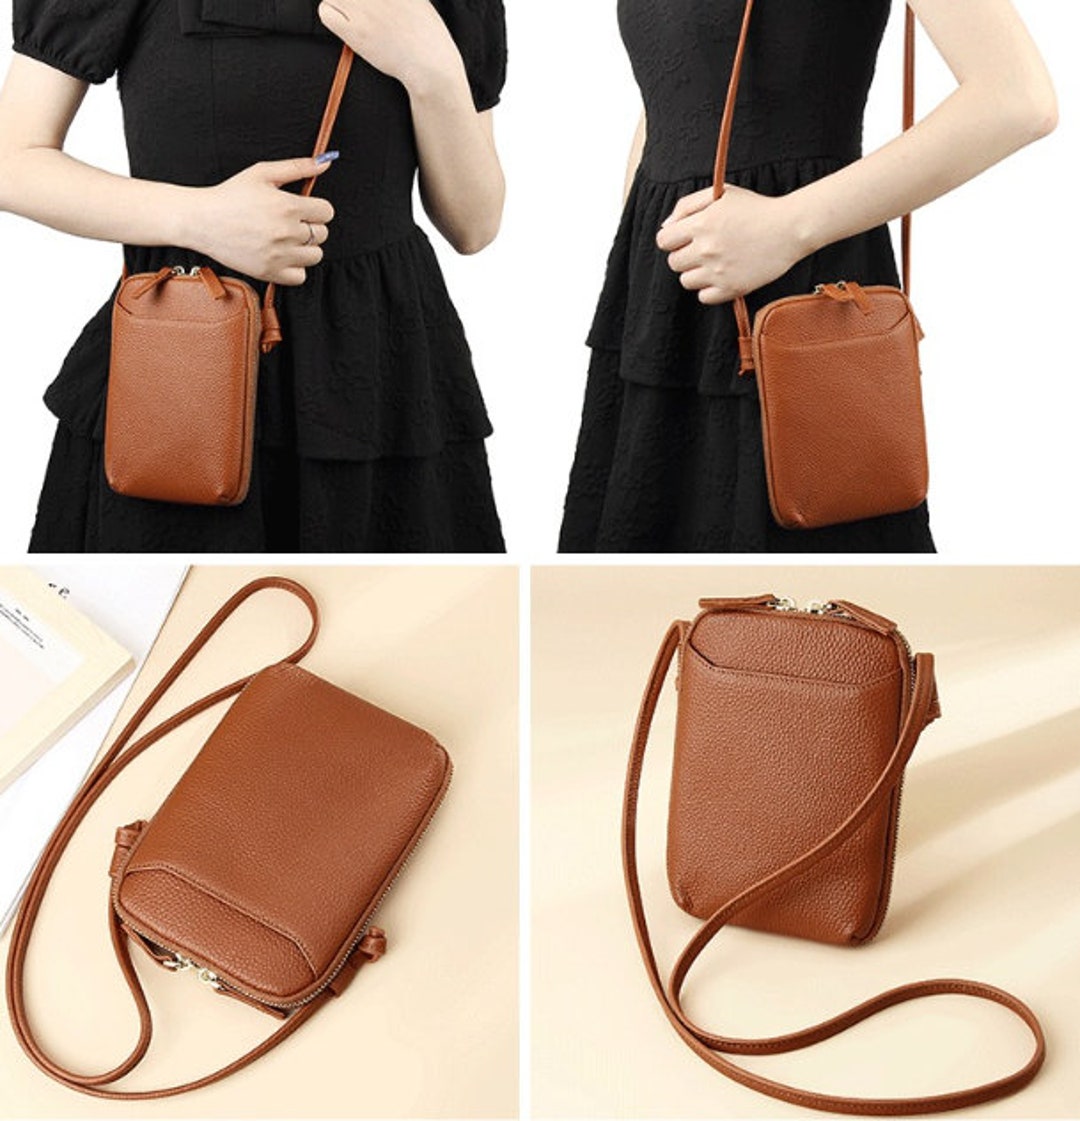 7 Colors Genuine Leather Crossbody Phone Bags,women Small Shoulder Bags ...